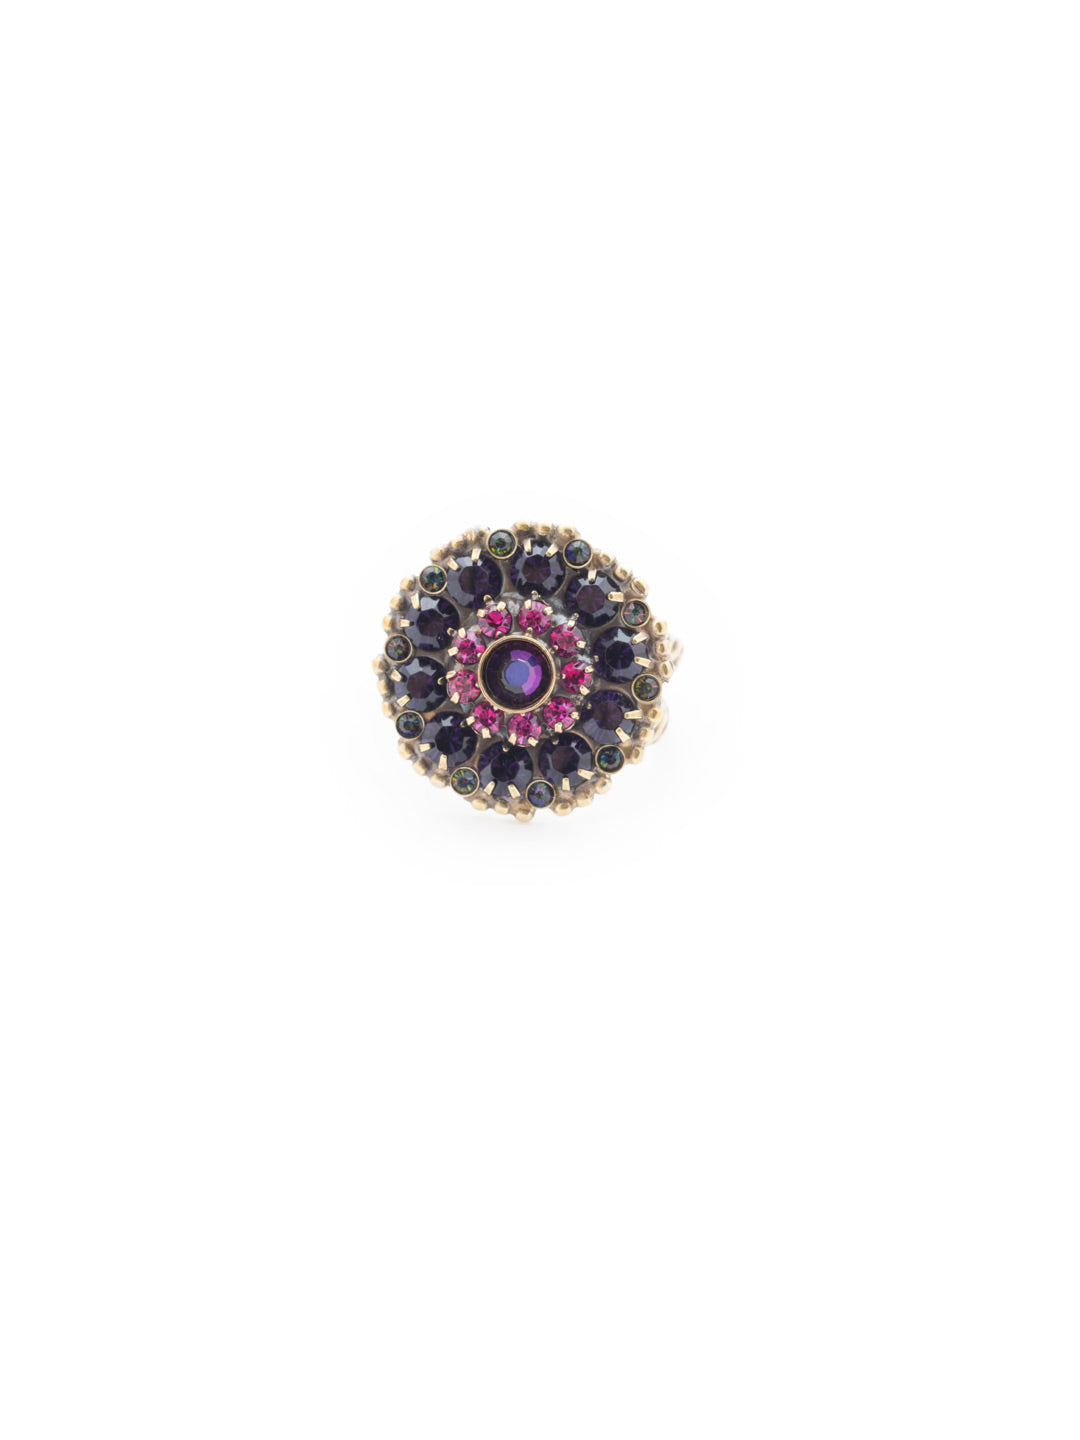 Charming Crystal Bloom Cocktail Ring - RBT78AGVO